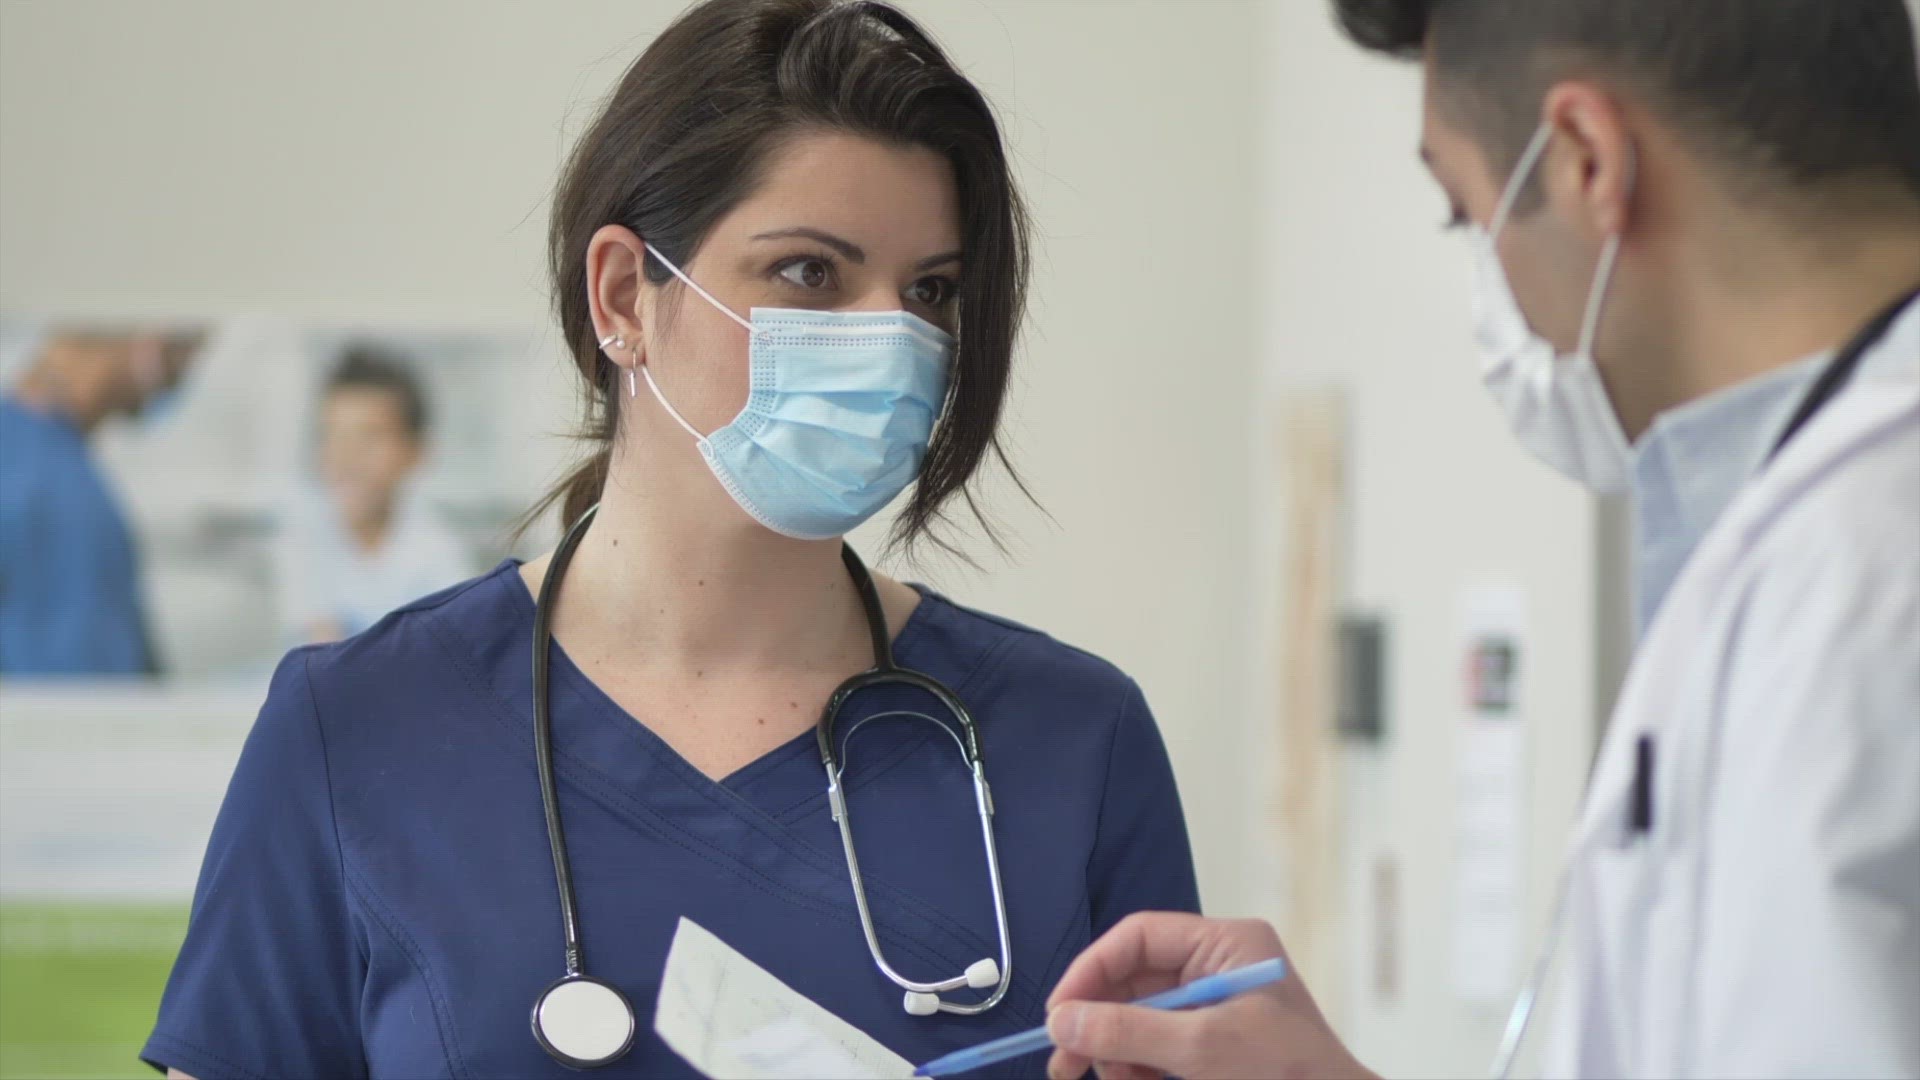 Nurses do not feel appreciated for their work. Buzz60's Keri Lumm shares the results of a new study conducted by OnePoll on behalf of connectRN.